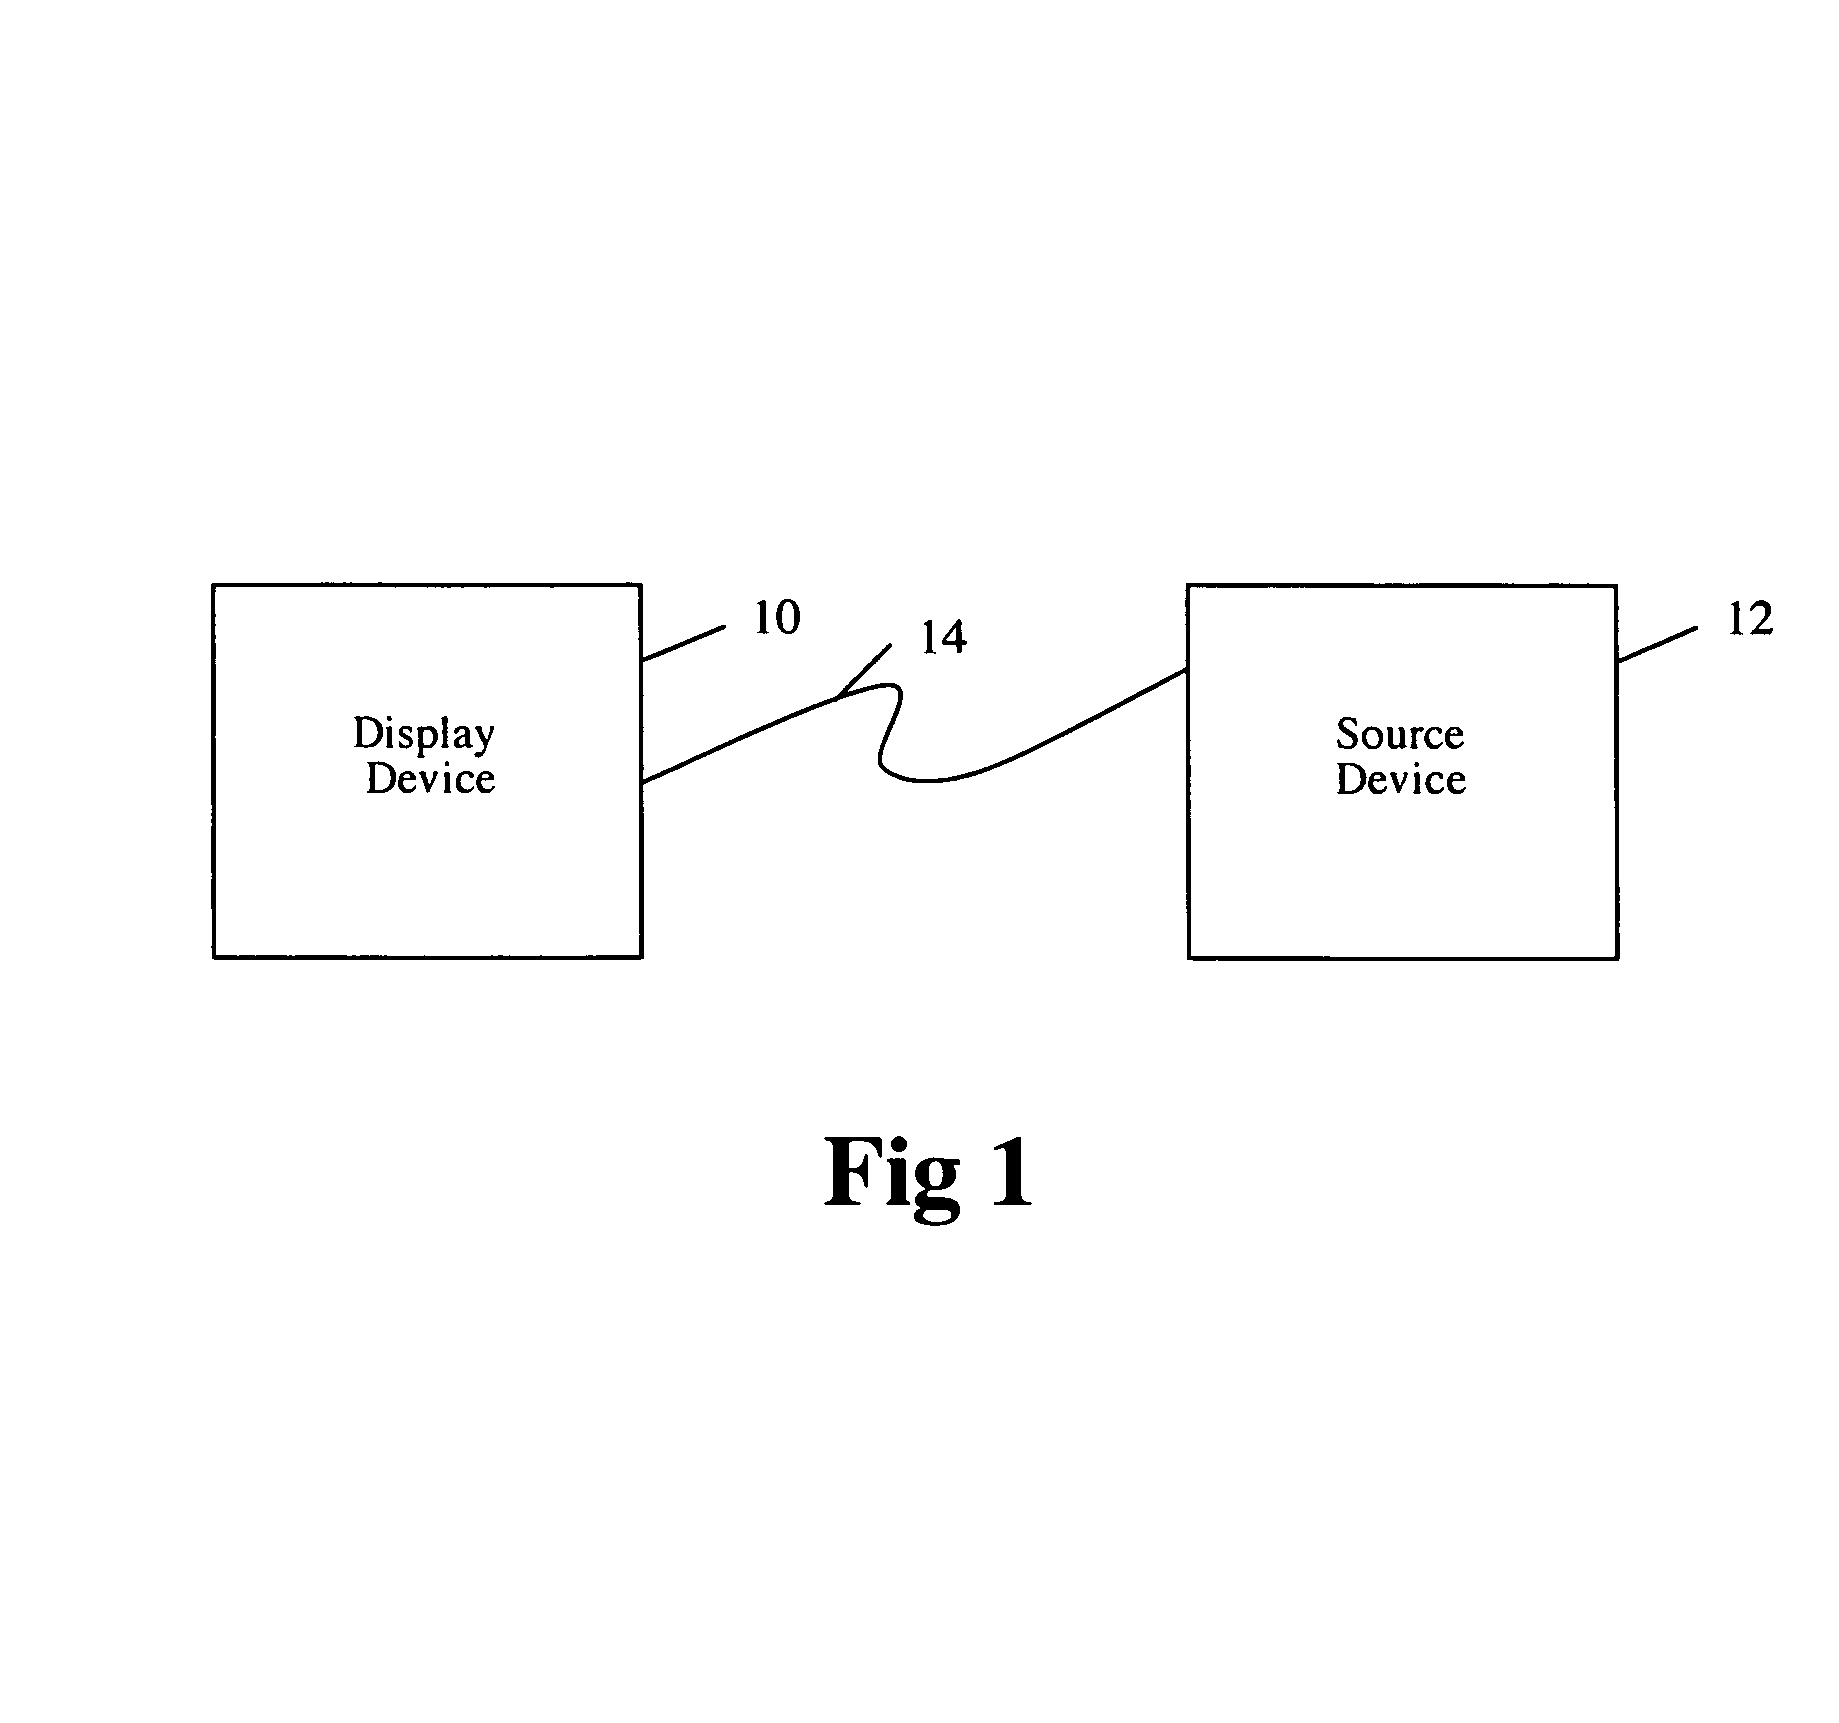 System for transmitting video images over a computer network to a remote receiver